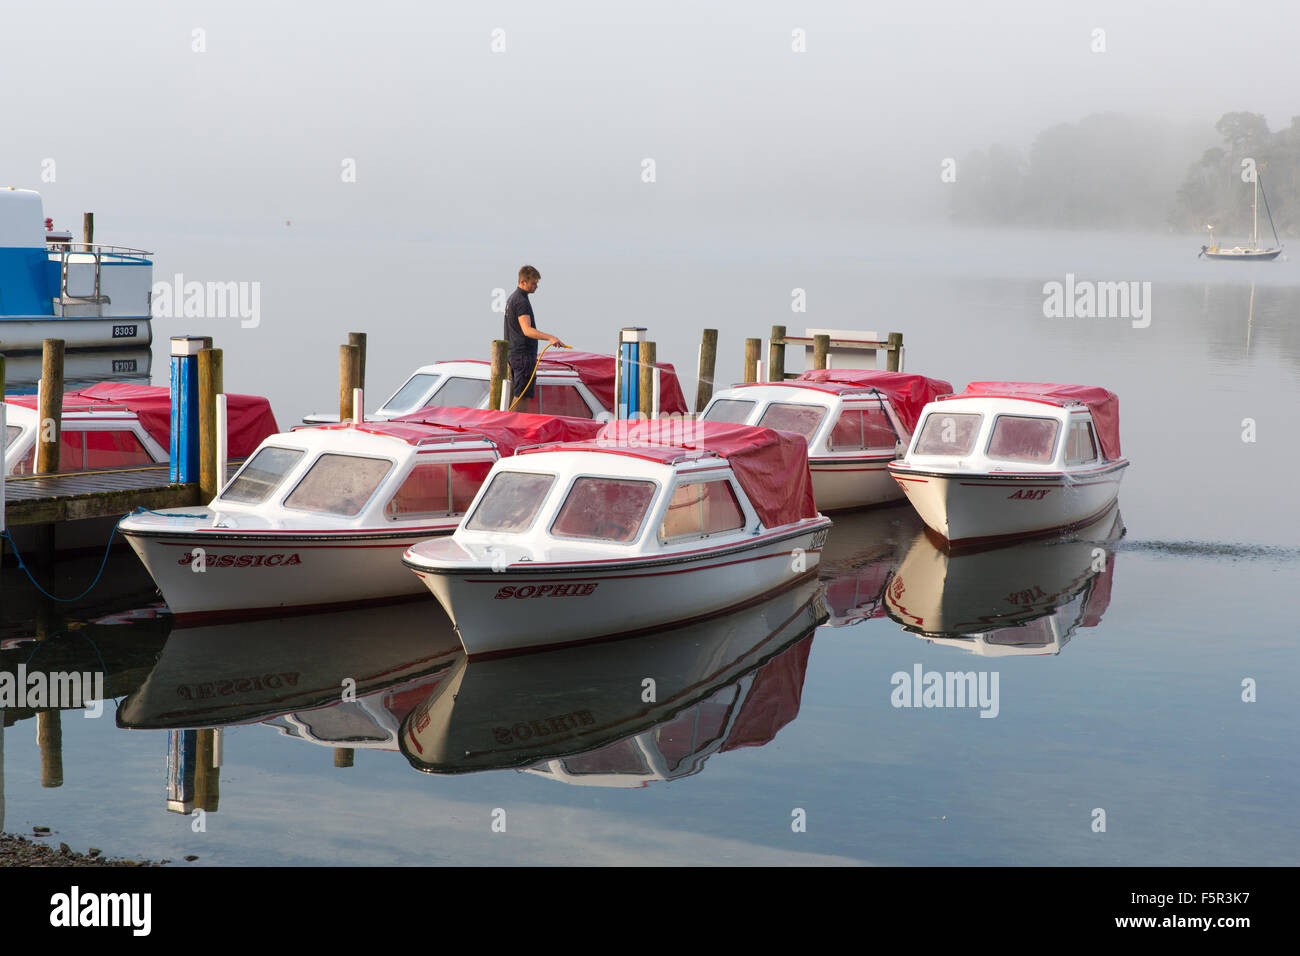 Hire boats being prepared on a misty morning on Lake Windermere Stock Photo